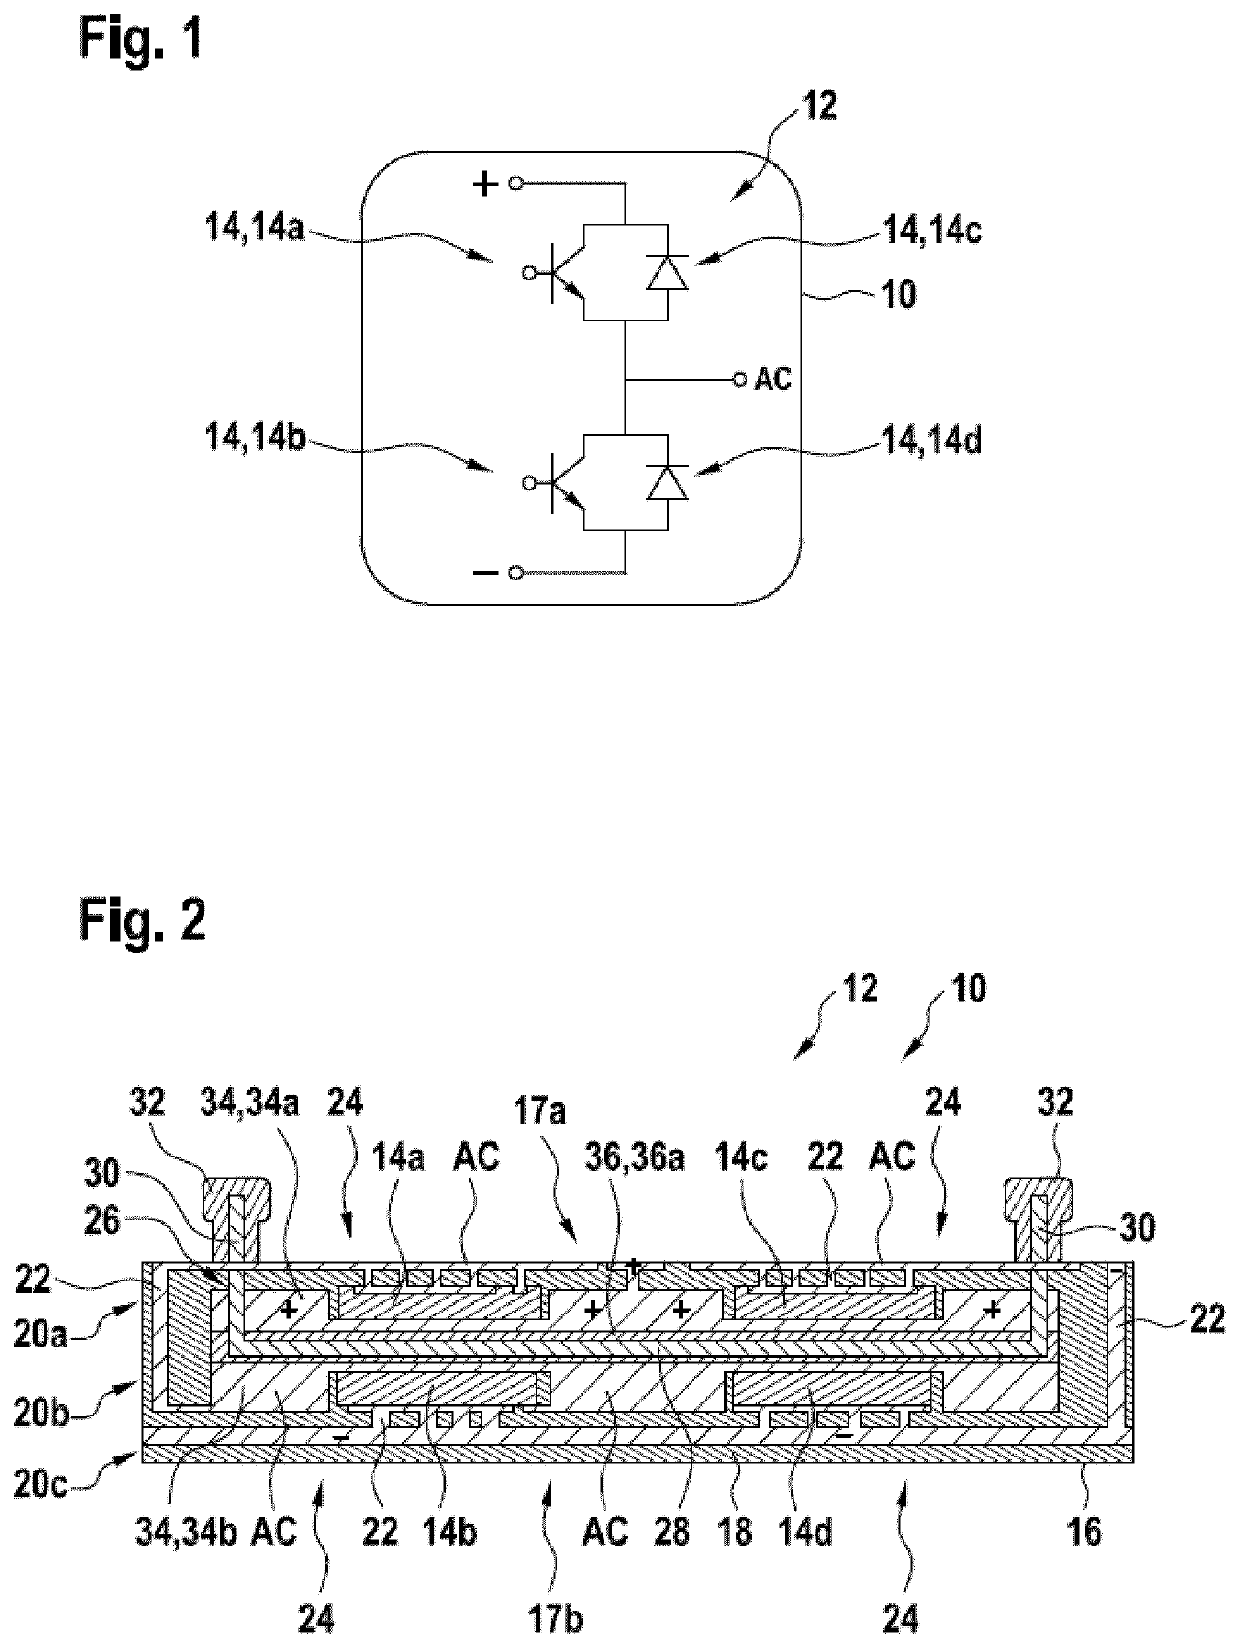 Cooled electronics package with stacked power electronics components